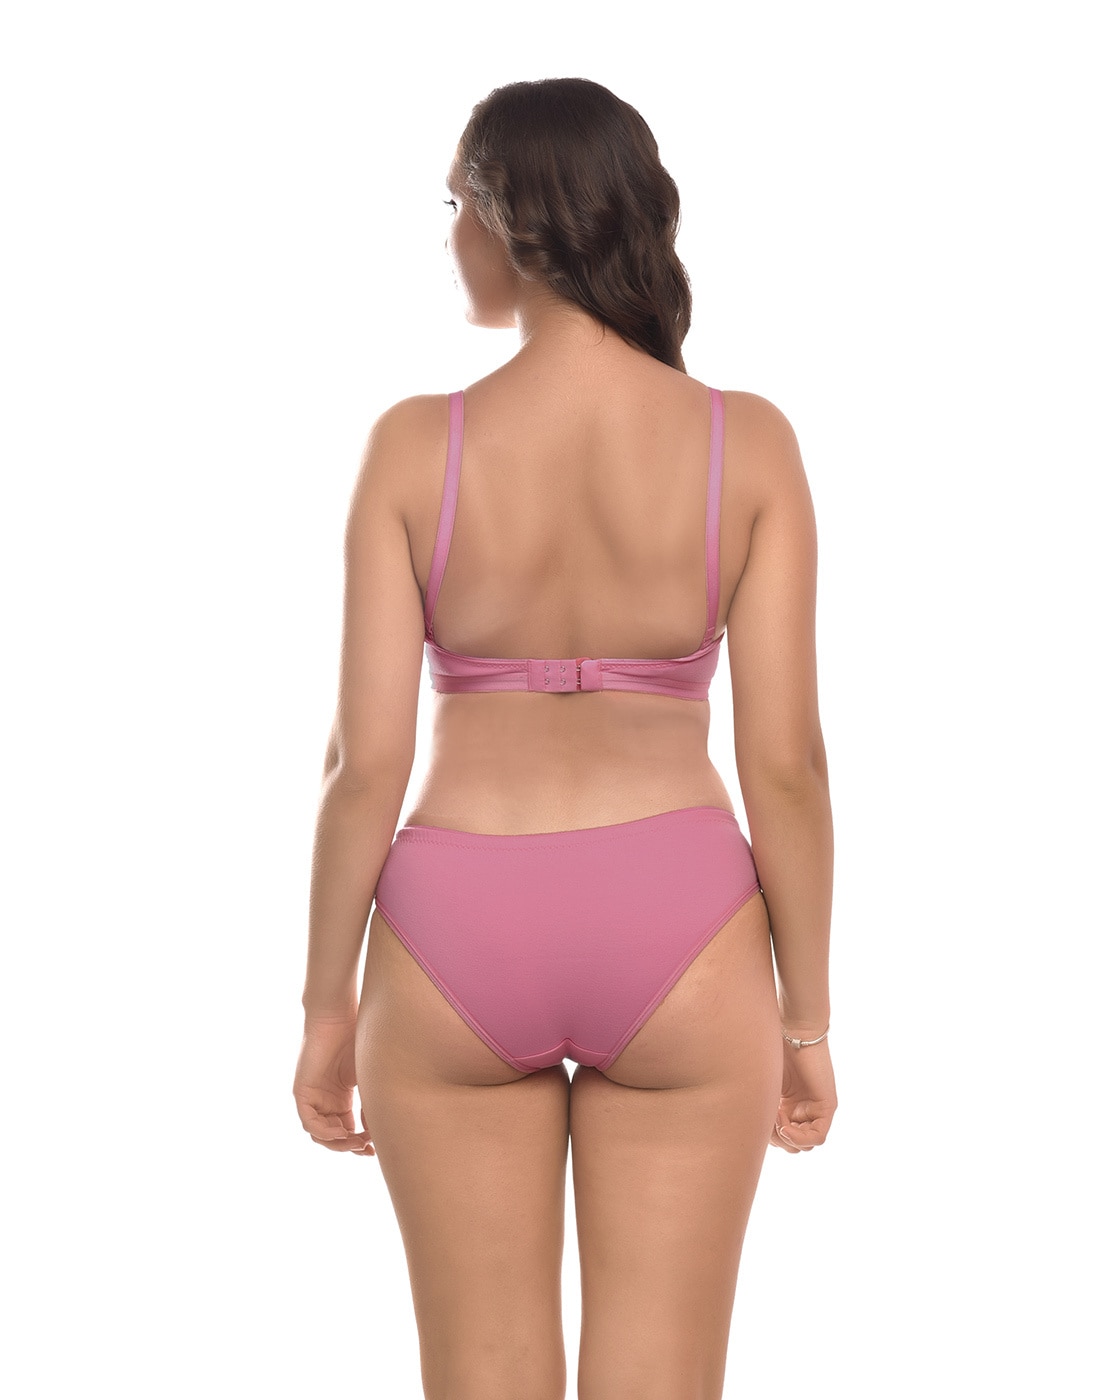 34b Cotton Spandex Lavender Womens Innerwear - Get Best Price from  Manufacturers & Suppliers in India